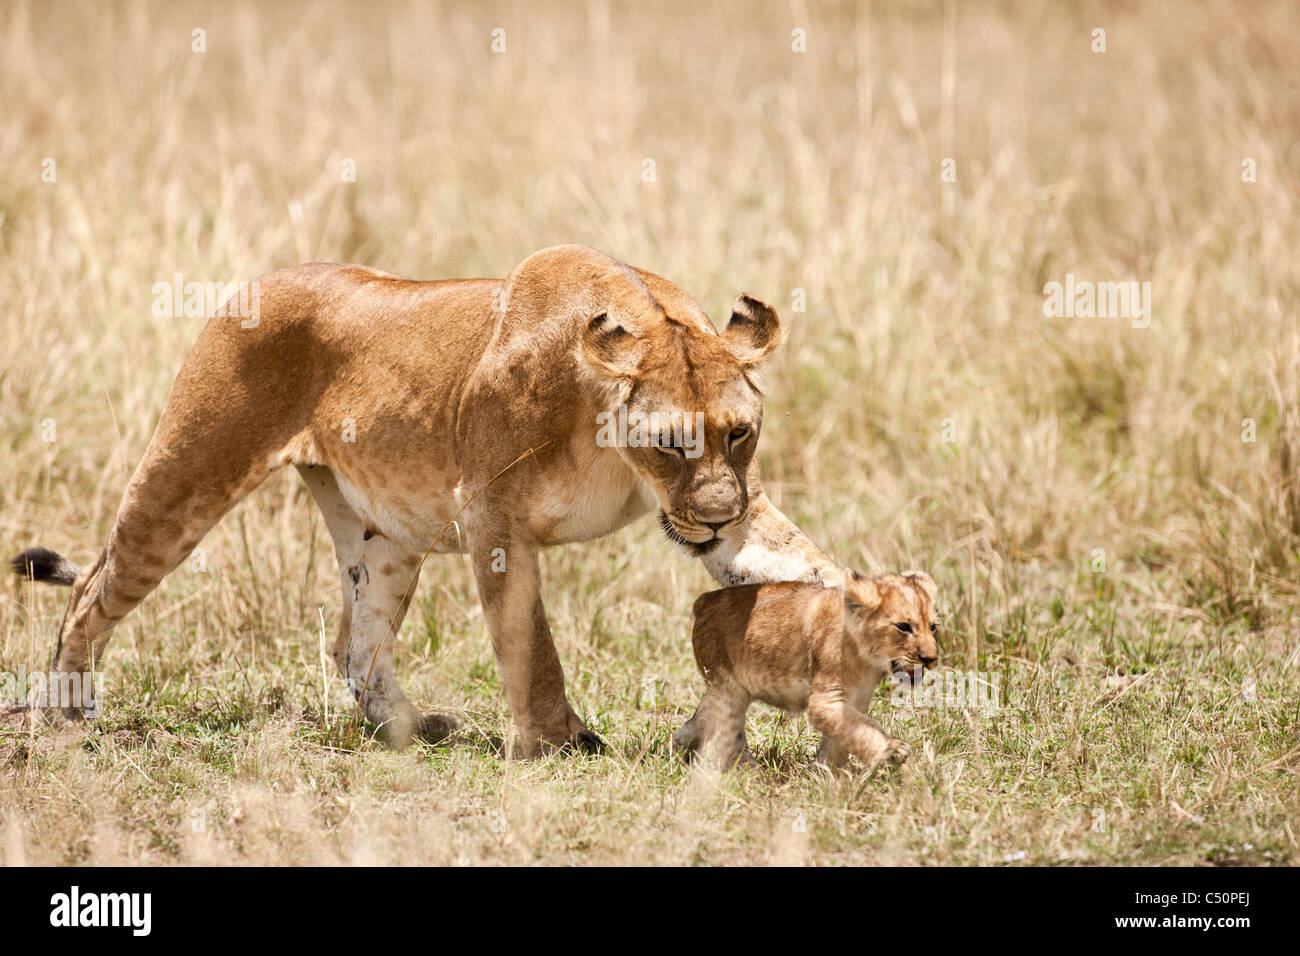 A lioness swipes her young cub to keep her from straying. Masai Mara, Kenya. Stock Photo